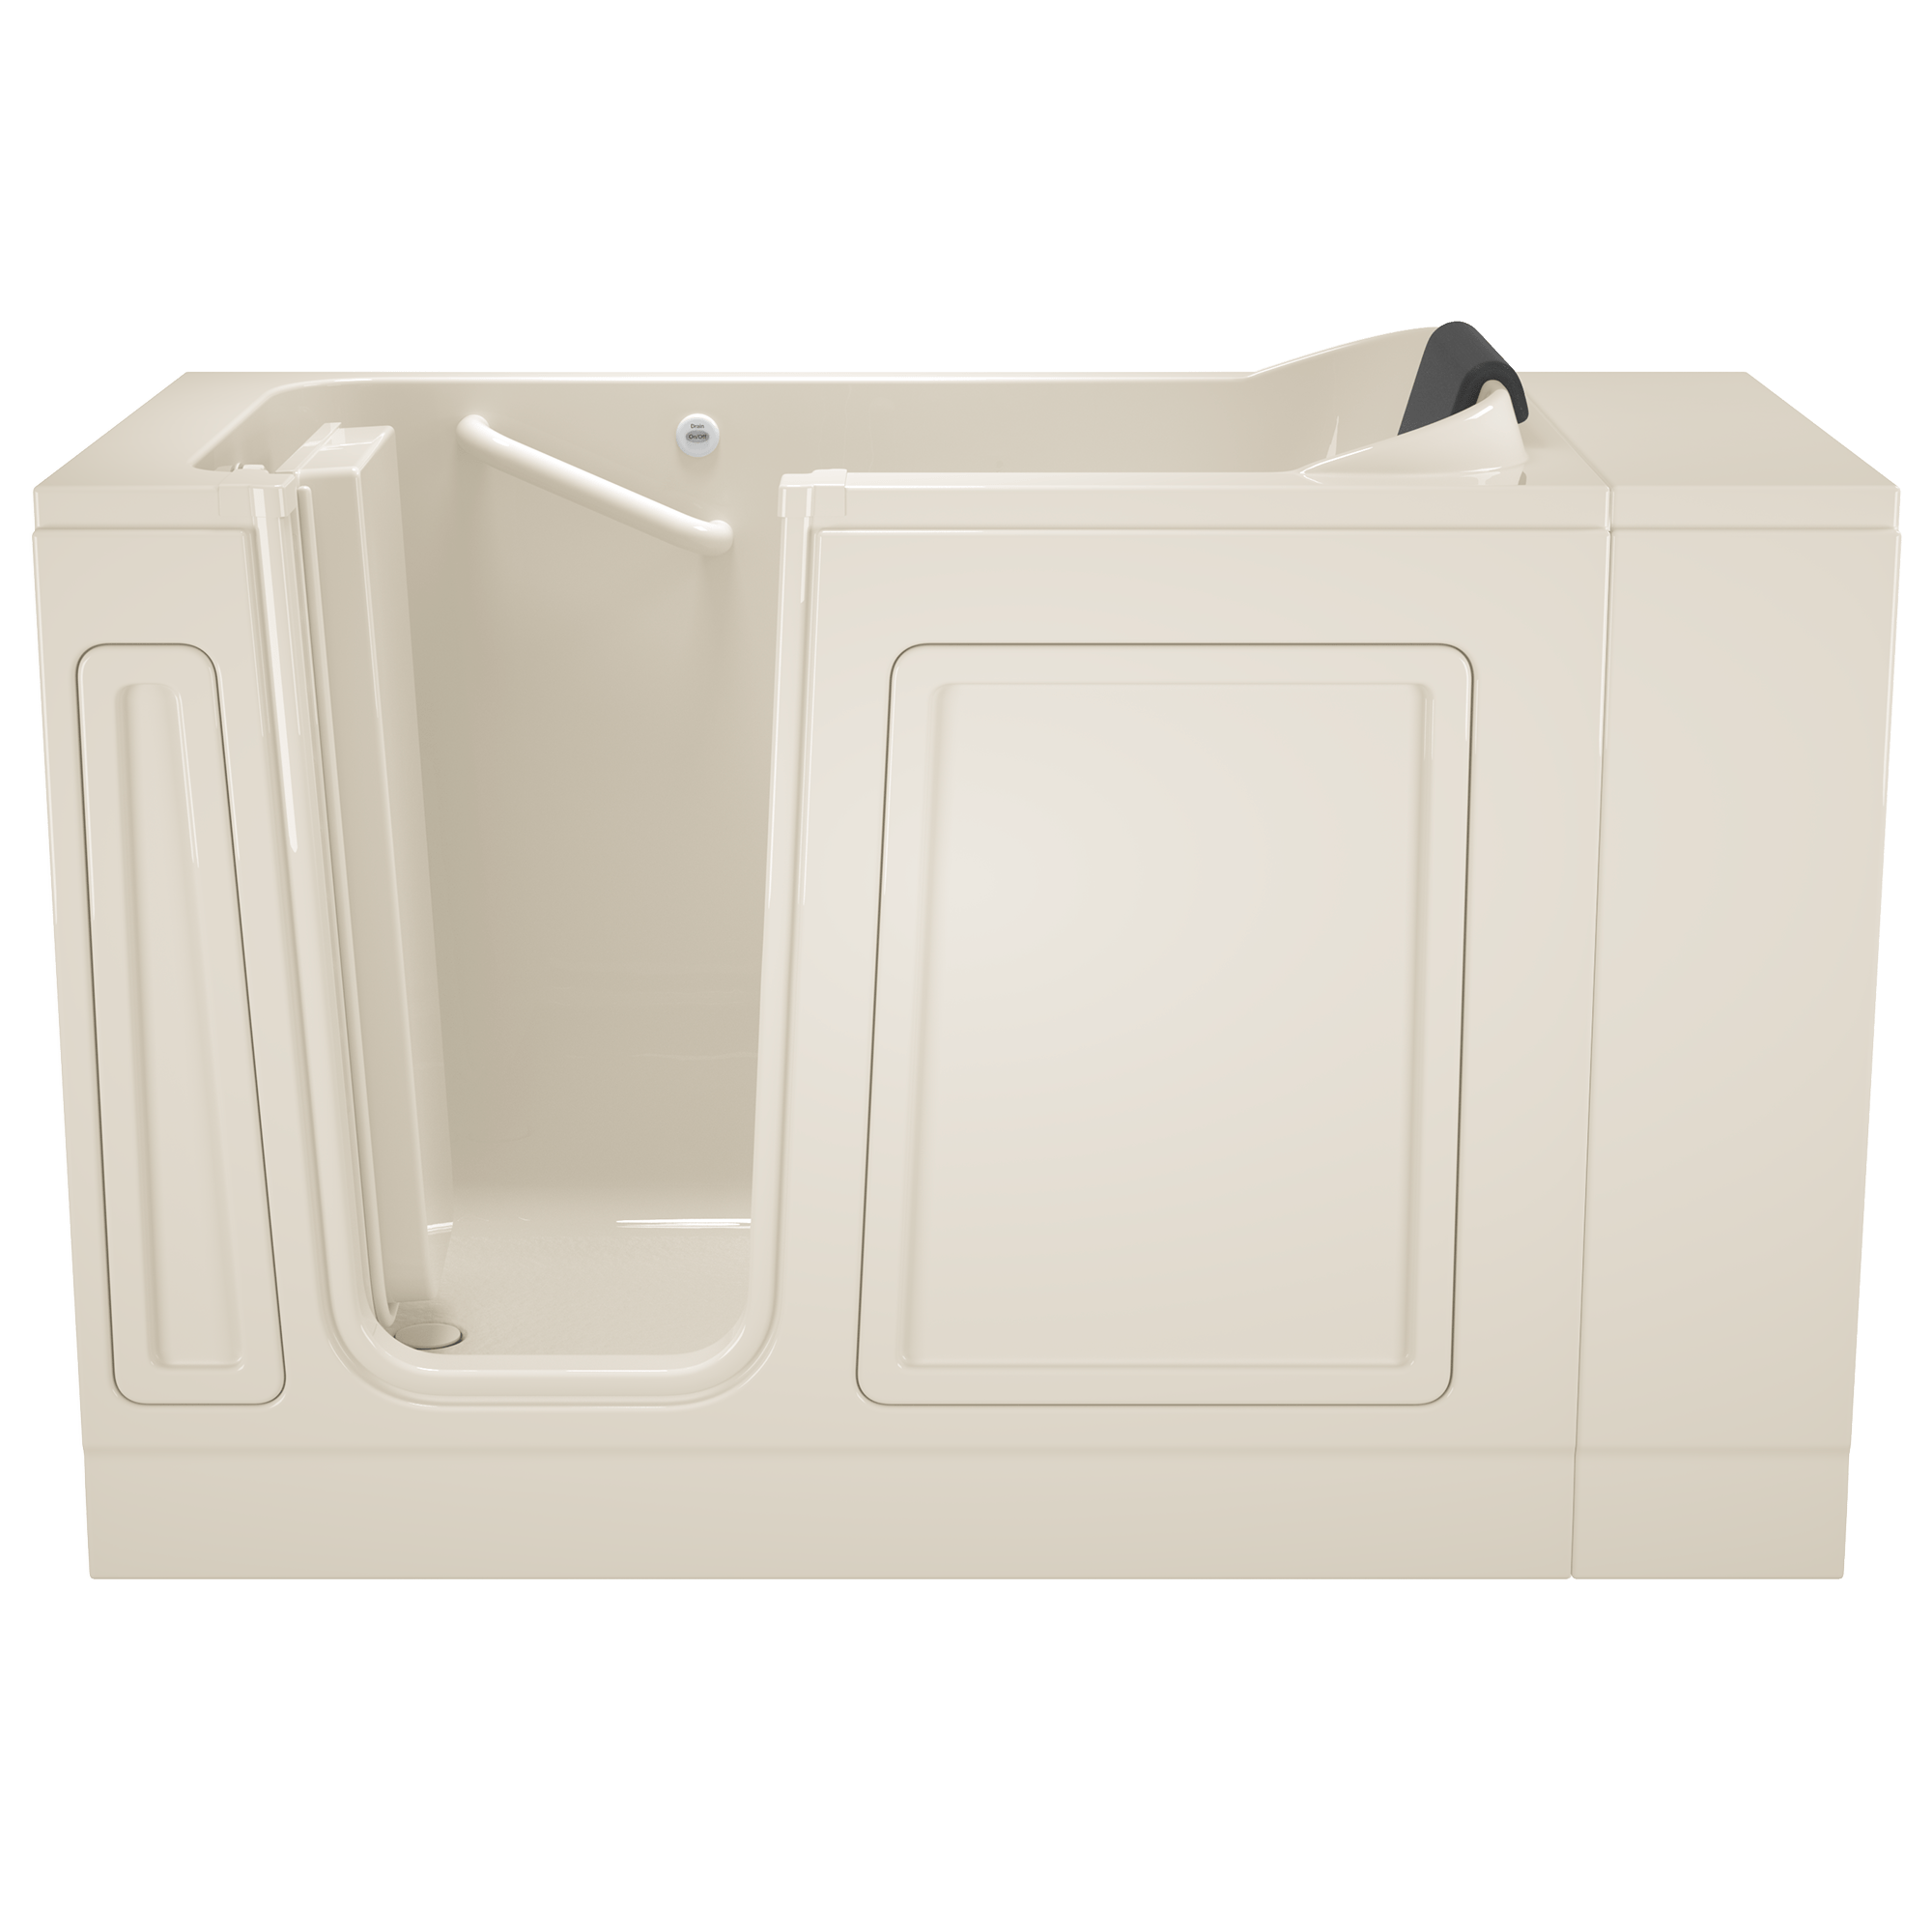 Acrylic Luxury Series 28 x 48-Inch Walk-in Tub With Soaker System - Left-Hand Drain